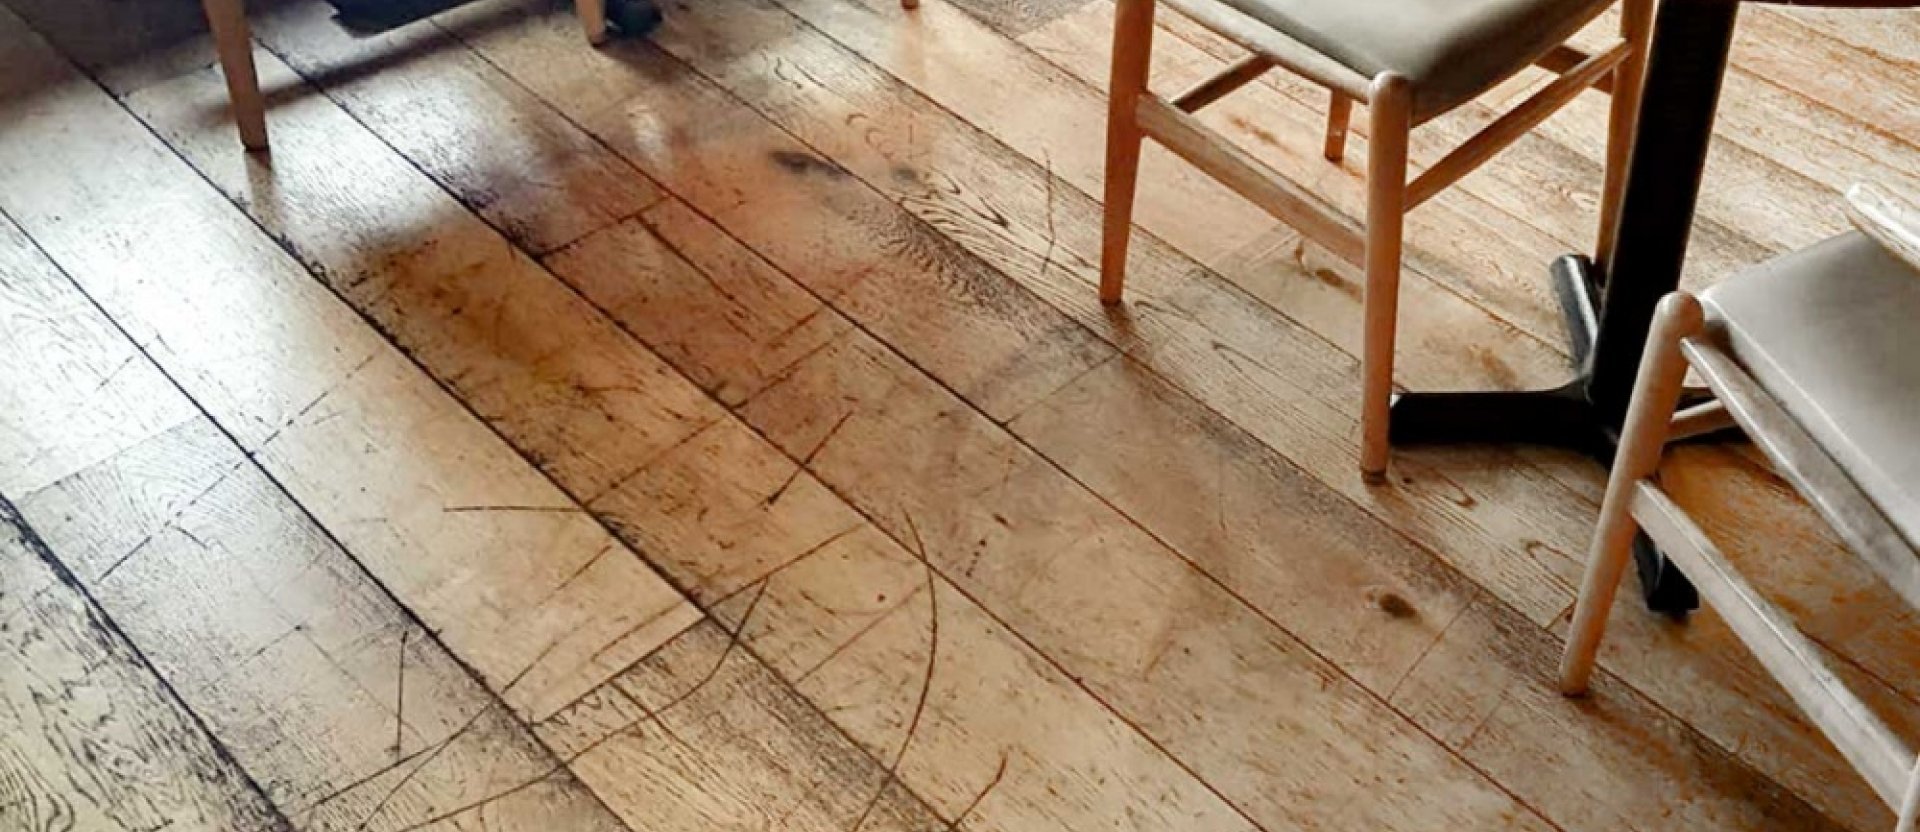 Why we don't recommend Oiled floors for commercial projects